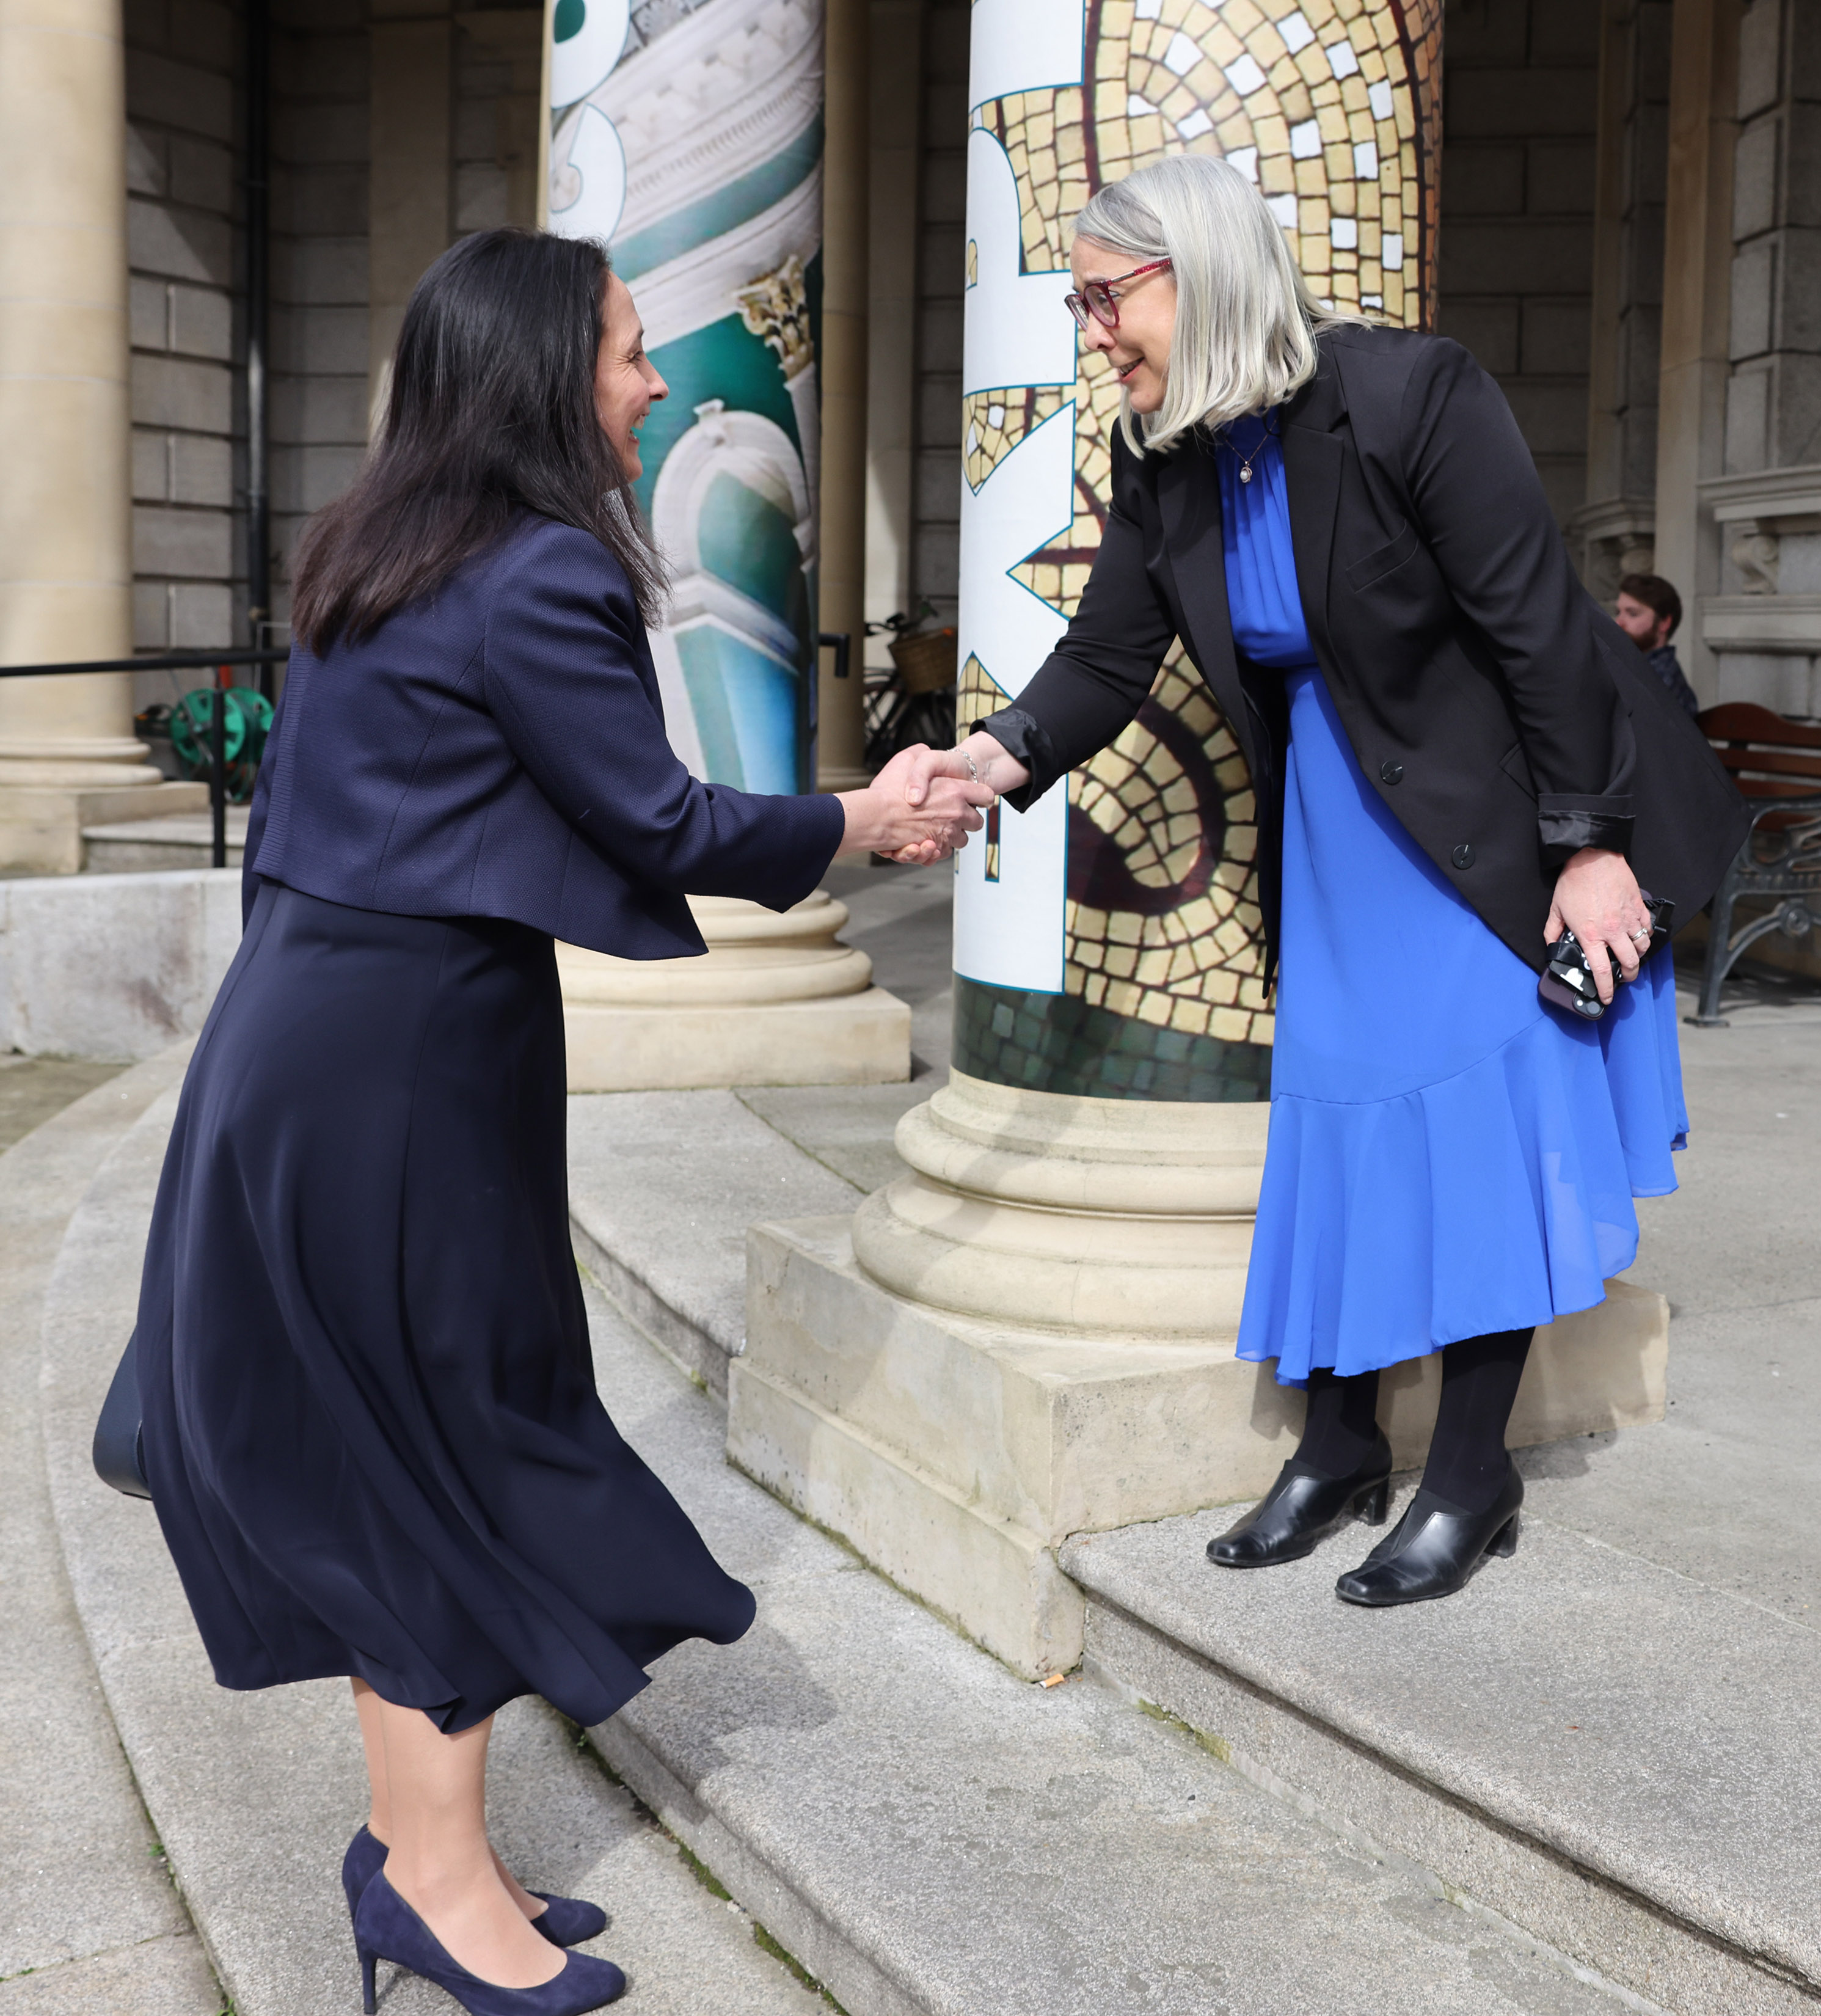 1.	NLI Director, Dr Audrey Whitty welcomes Minister Martin, T.D. at the front steps of the National Library of Ireland.